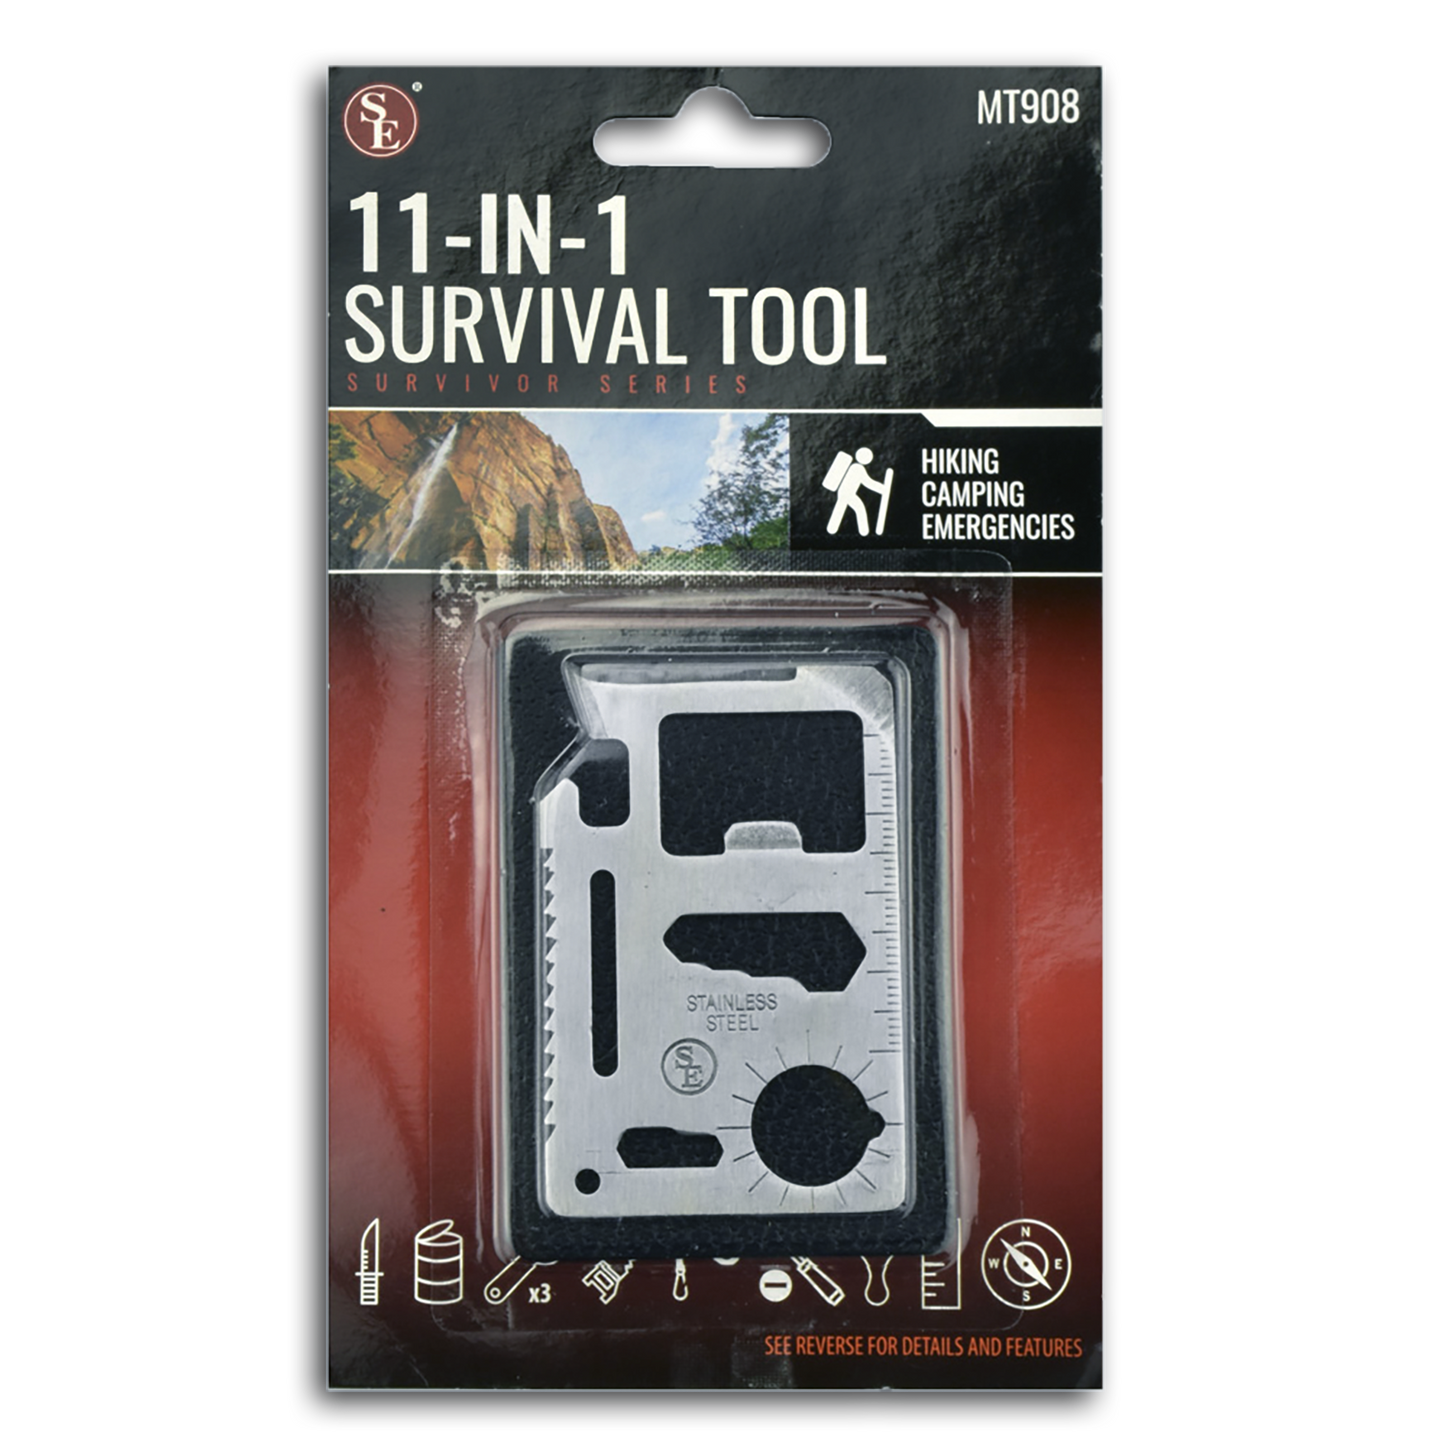 11-IN-1 SURVIVAL TOOL